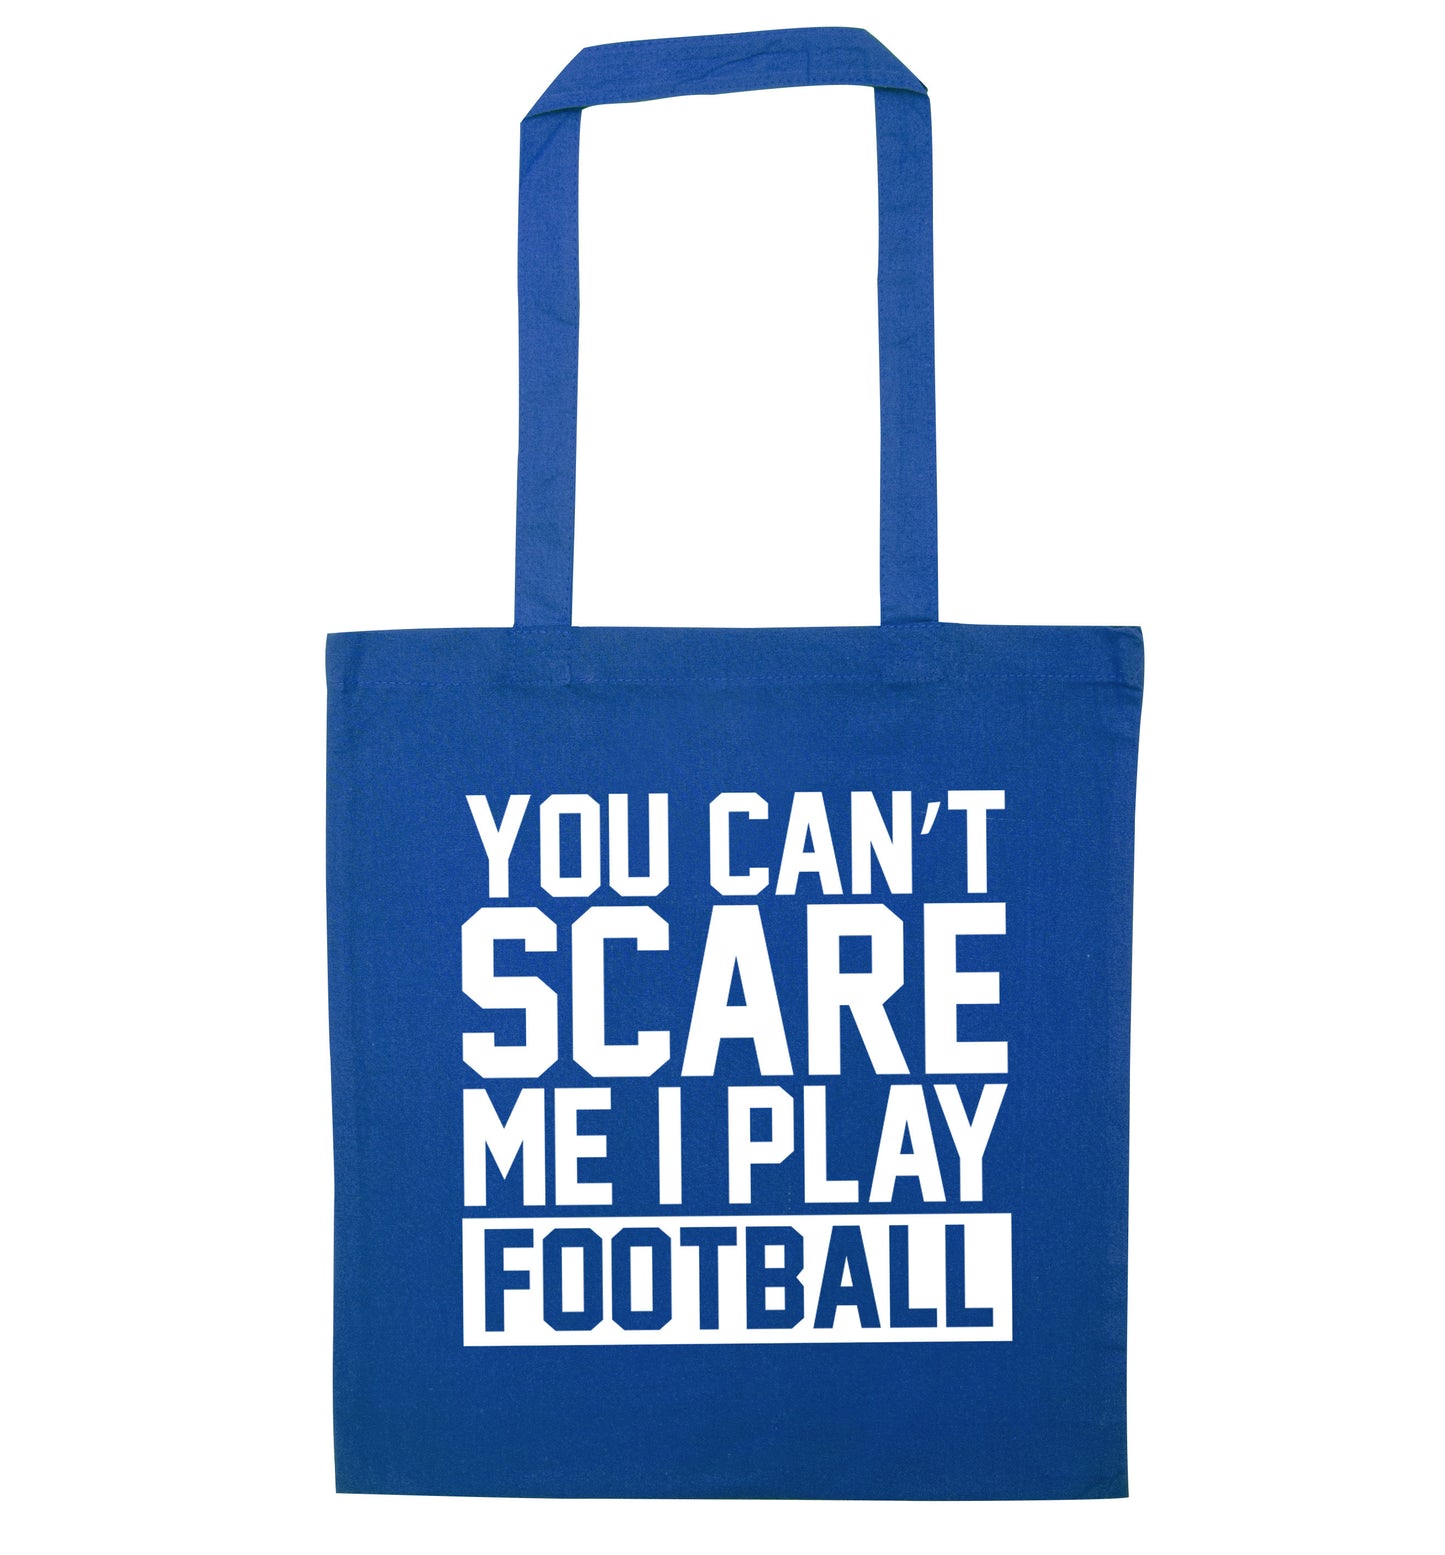 You can't scare me I play football blue tote bag